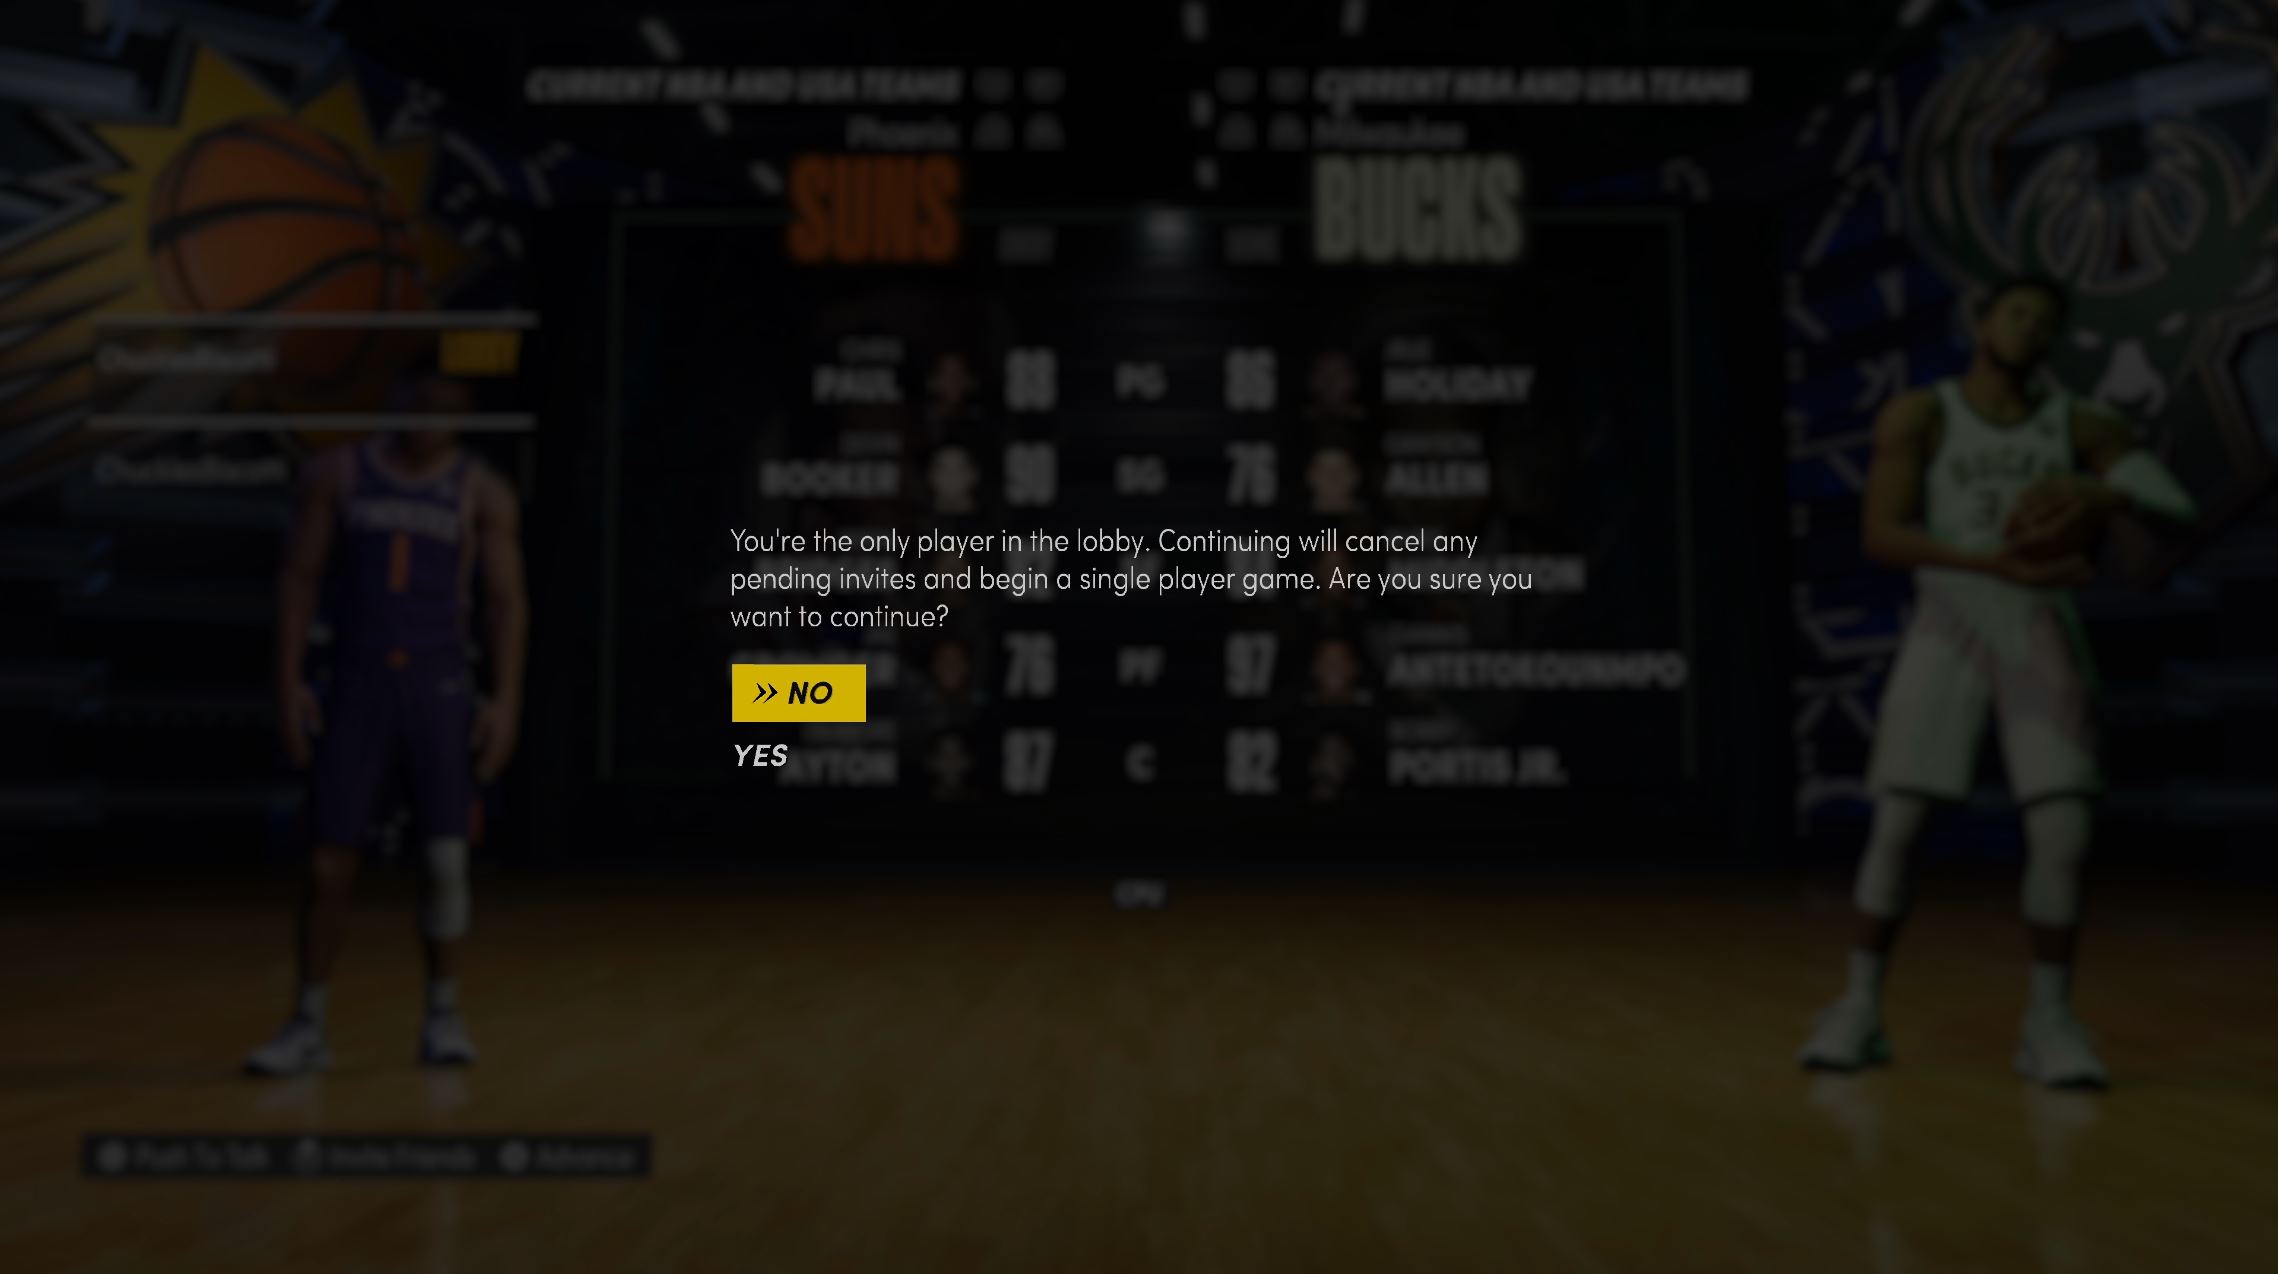 NBA 2K22 Play With Friends Online Bug On Next-Gen Consoles